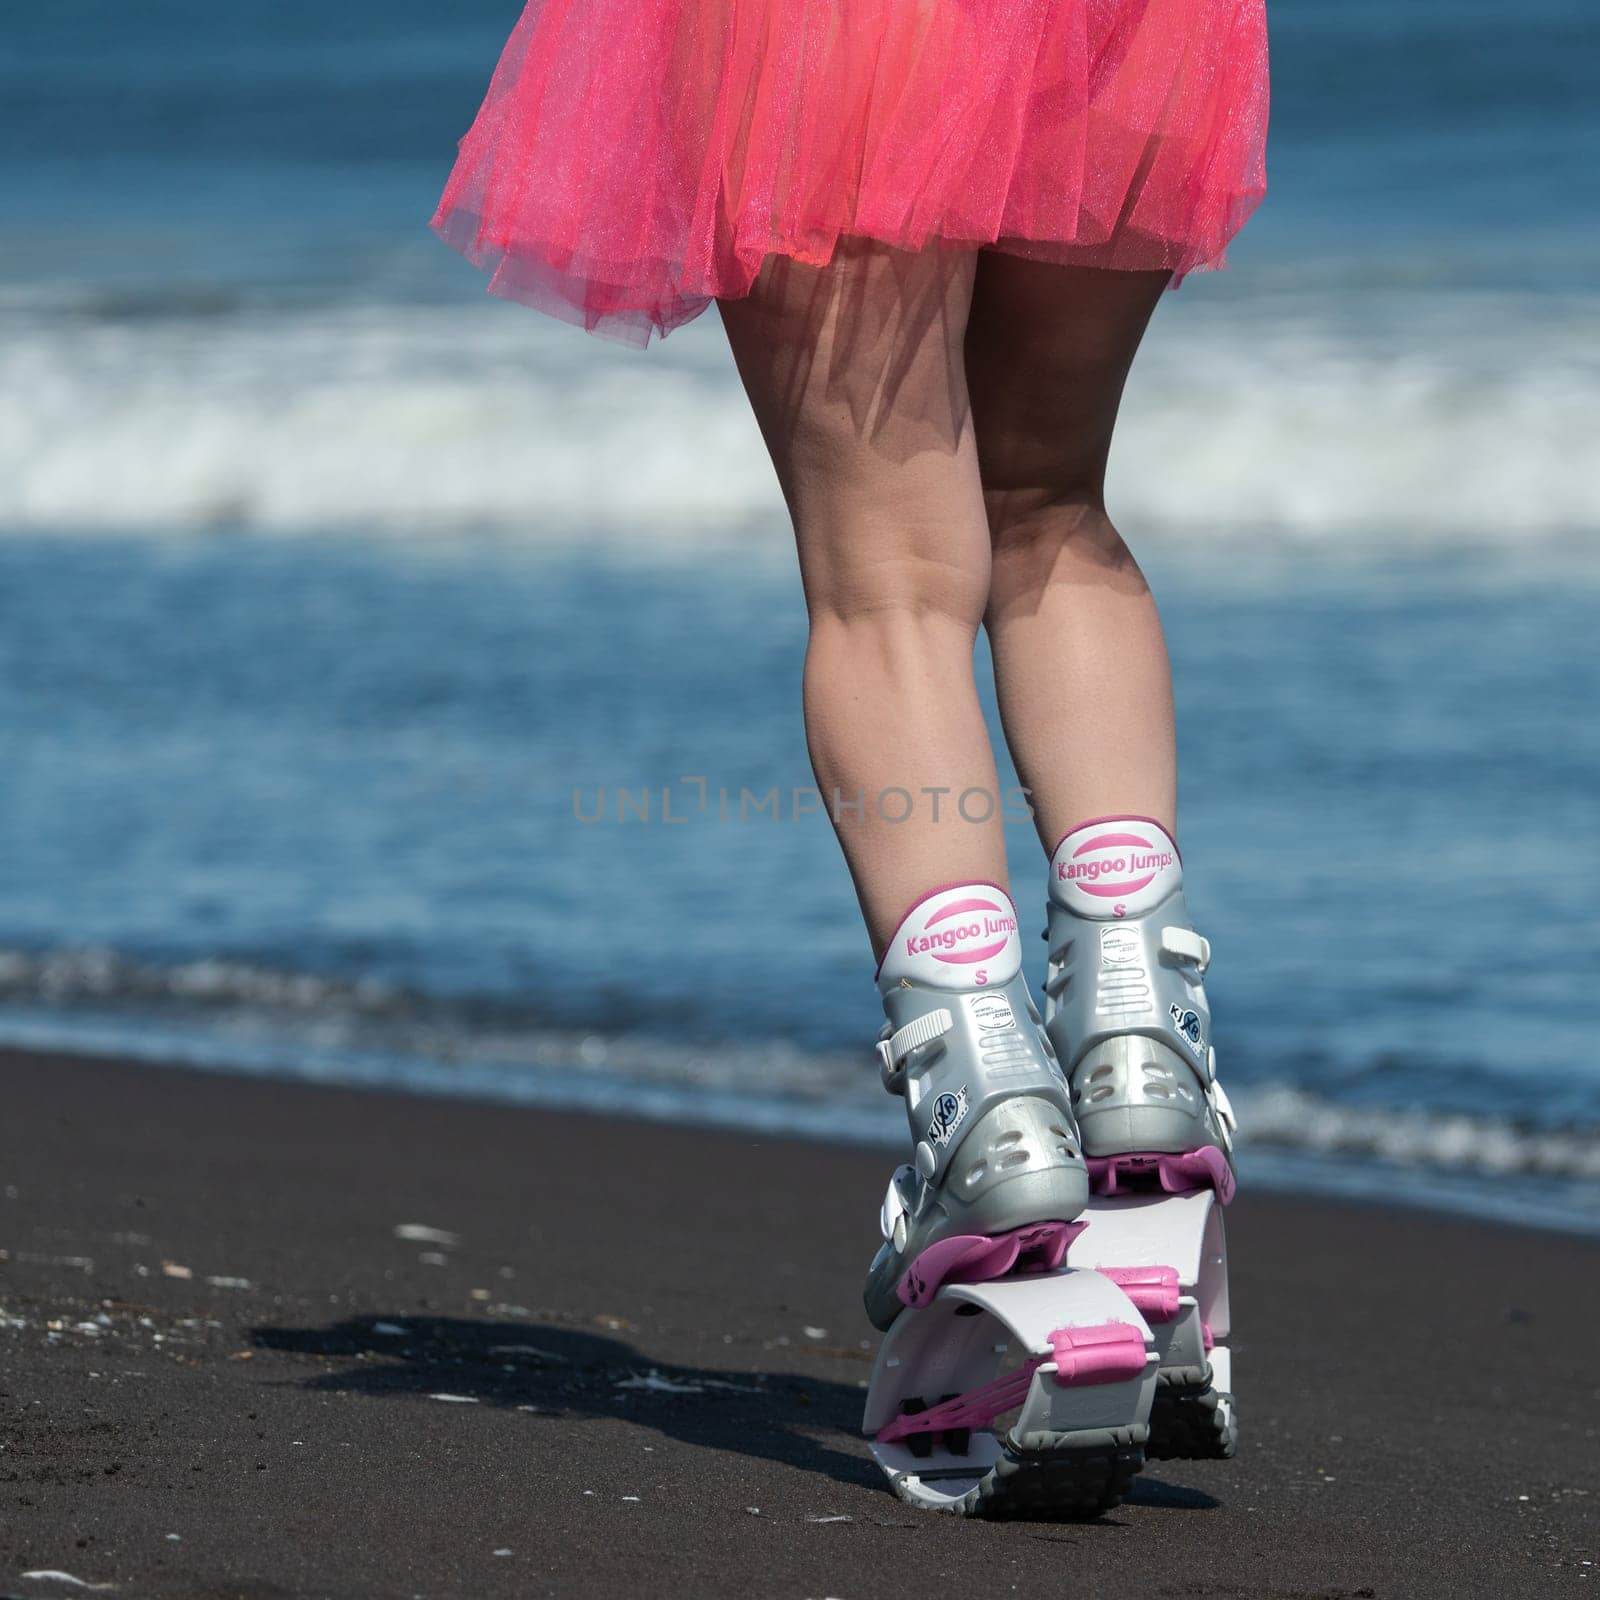 Rear view sportive woman legs in Kangoo Jumps sports boots and short pink skirt running on beach during aerobic exercise outdoors by Alexander-Piragis